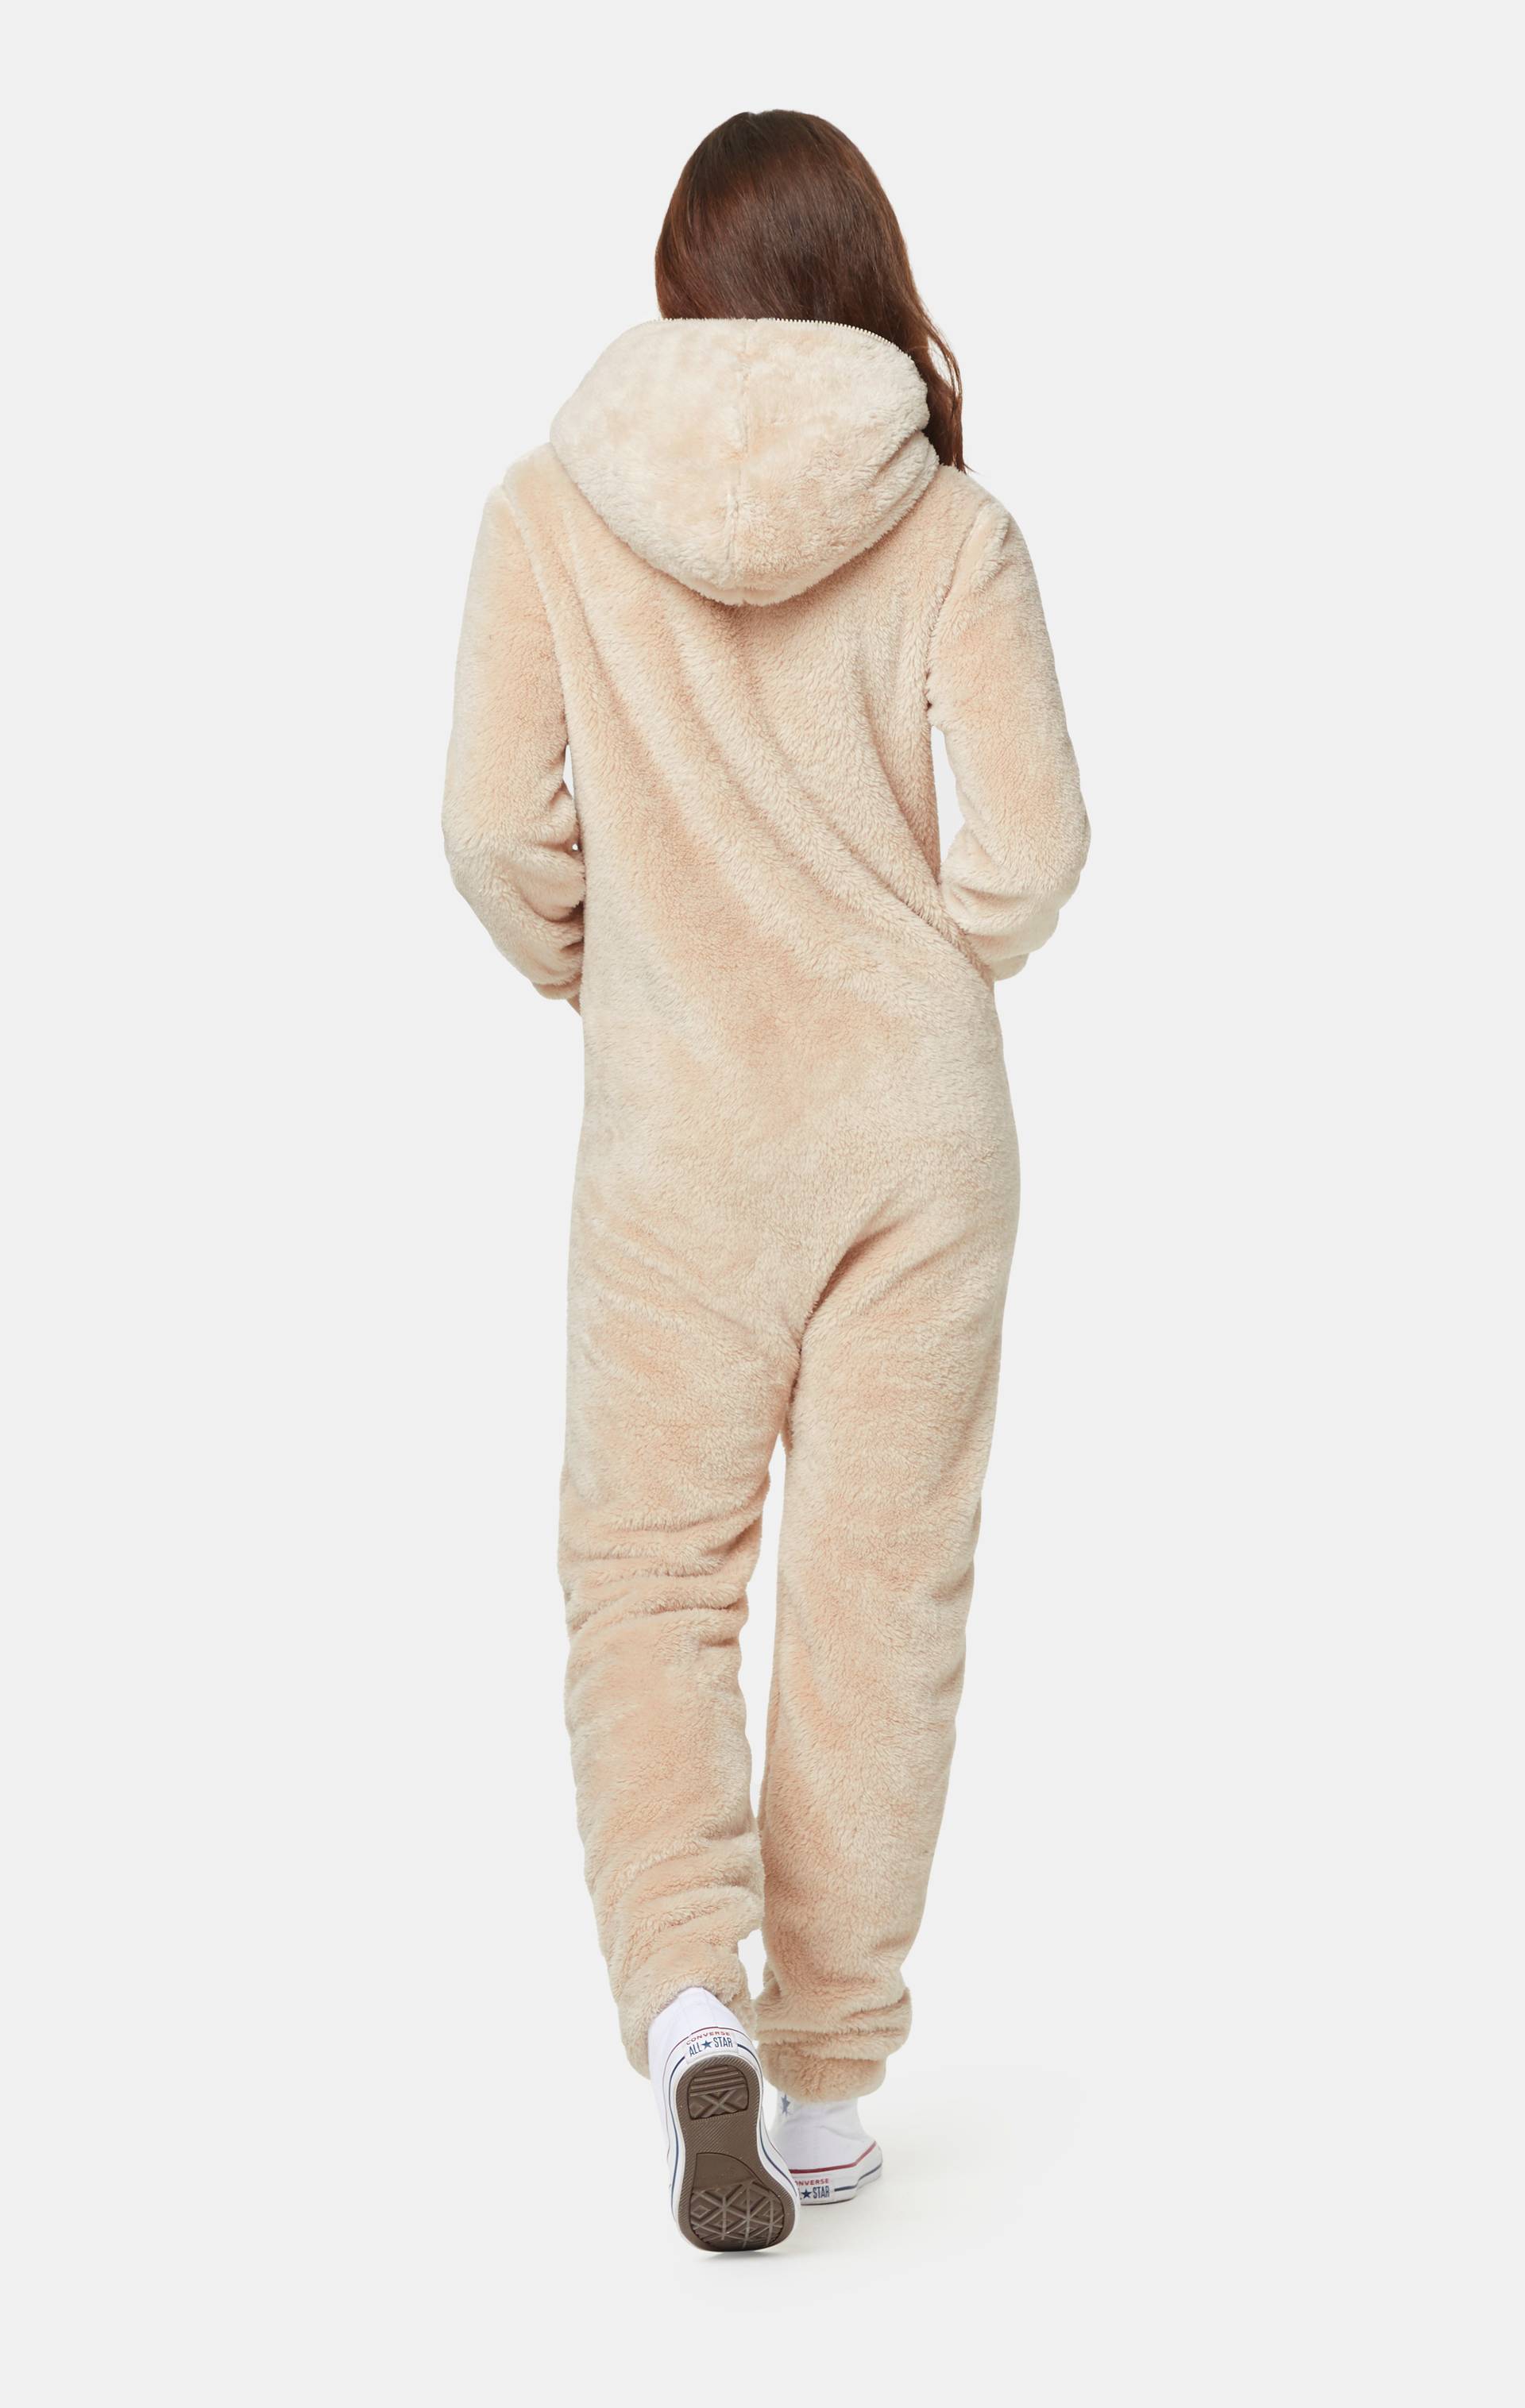 Onepiece The Puppy Jumpsuit Light Brown - 6